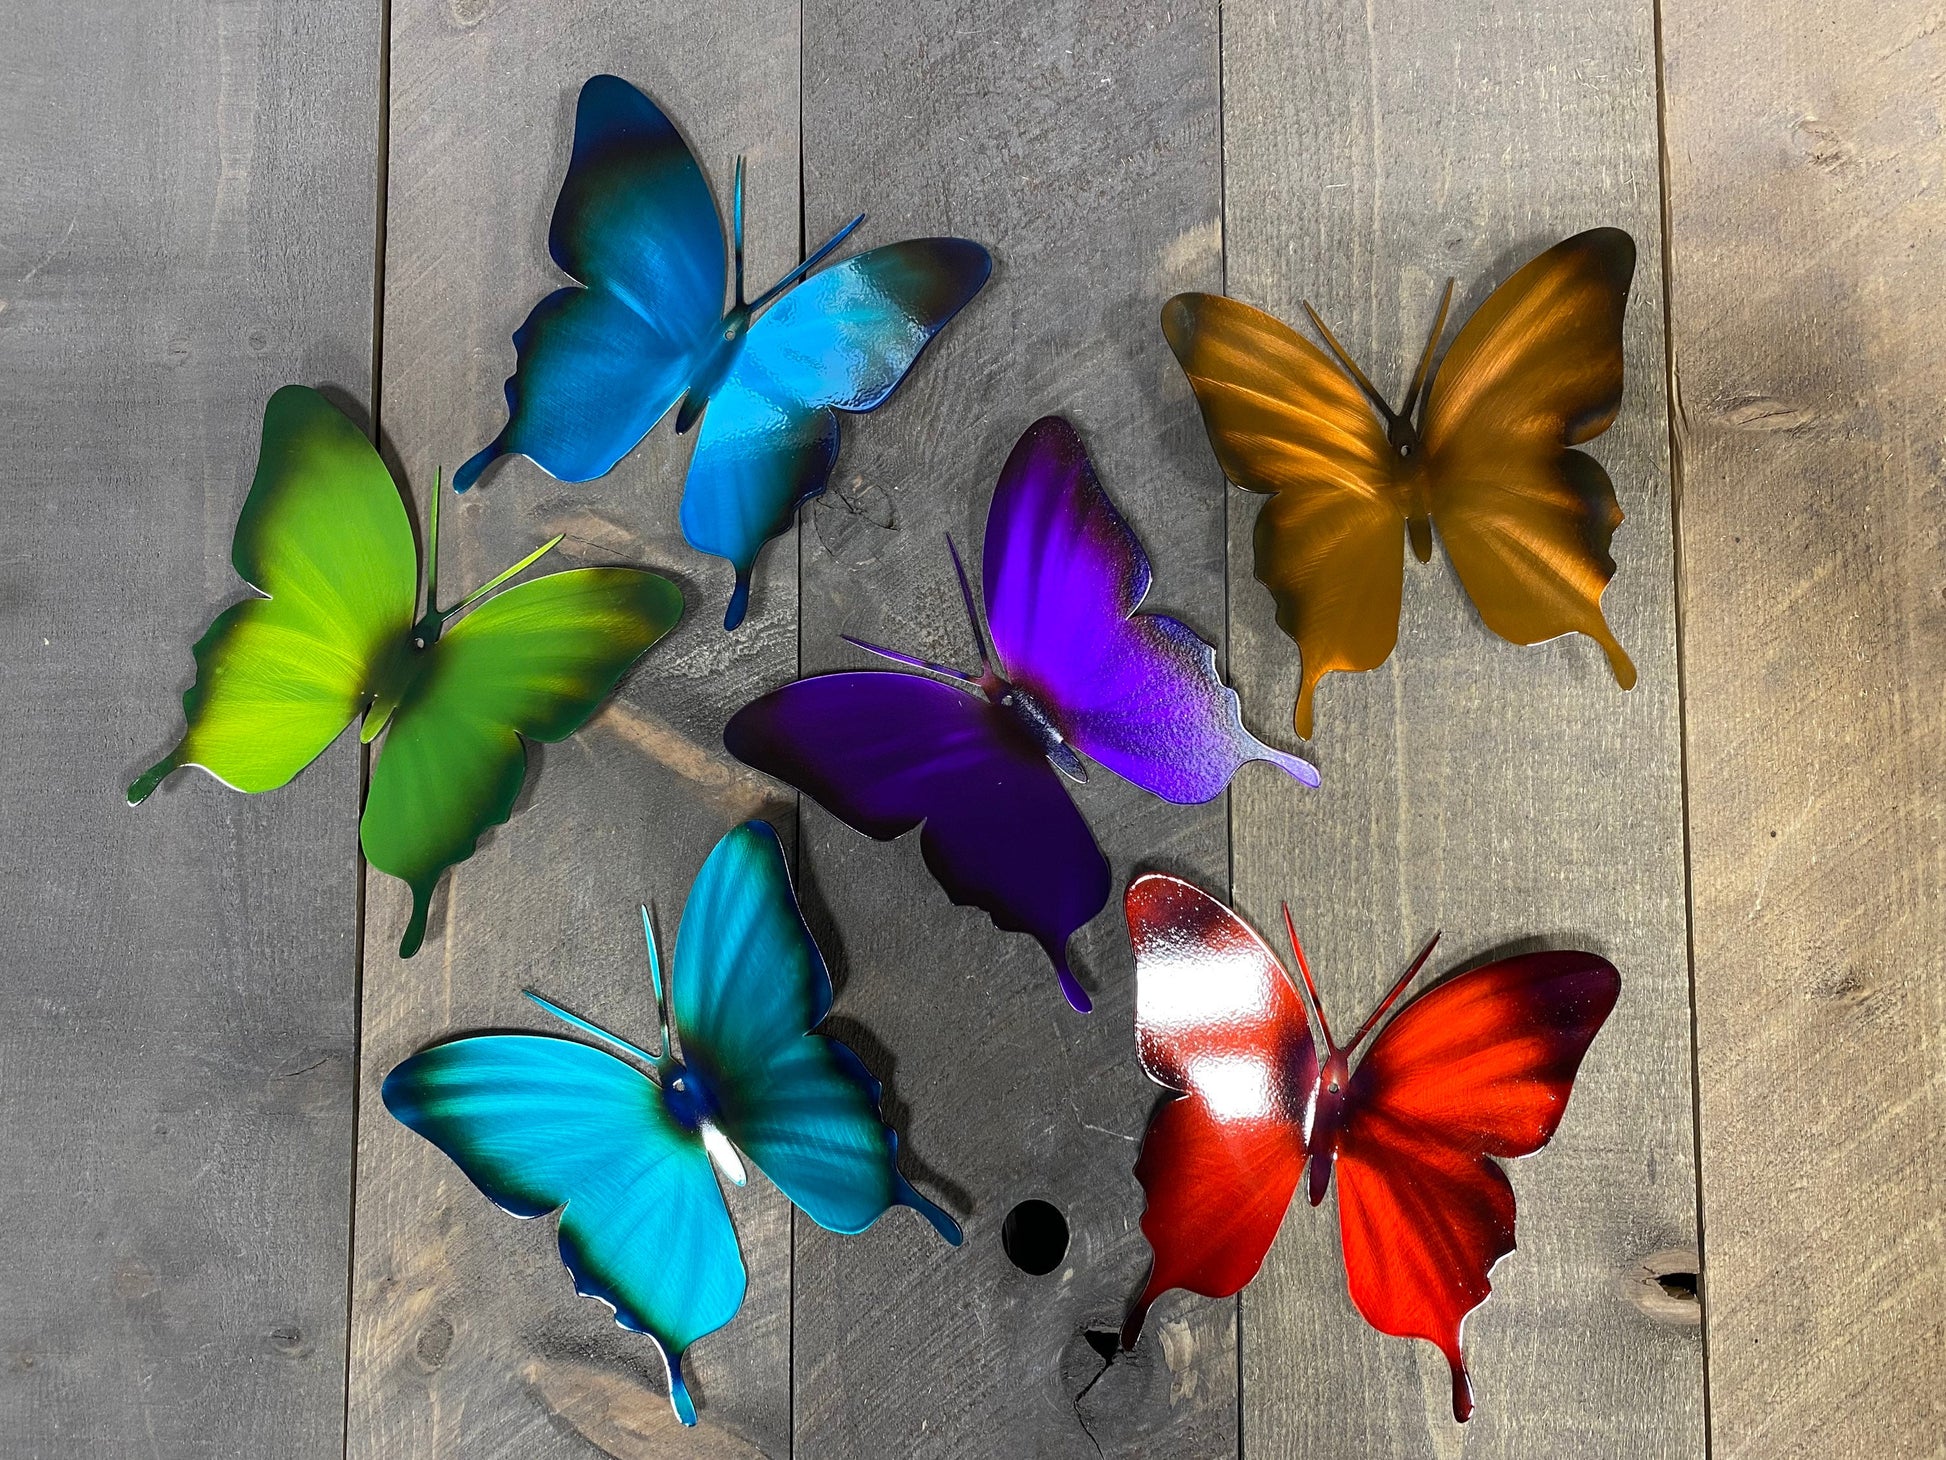 Butterfly Wall Art Metal 3d Butterfly Crafts Compatible With Home Garden  Decor A